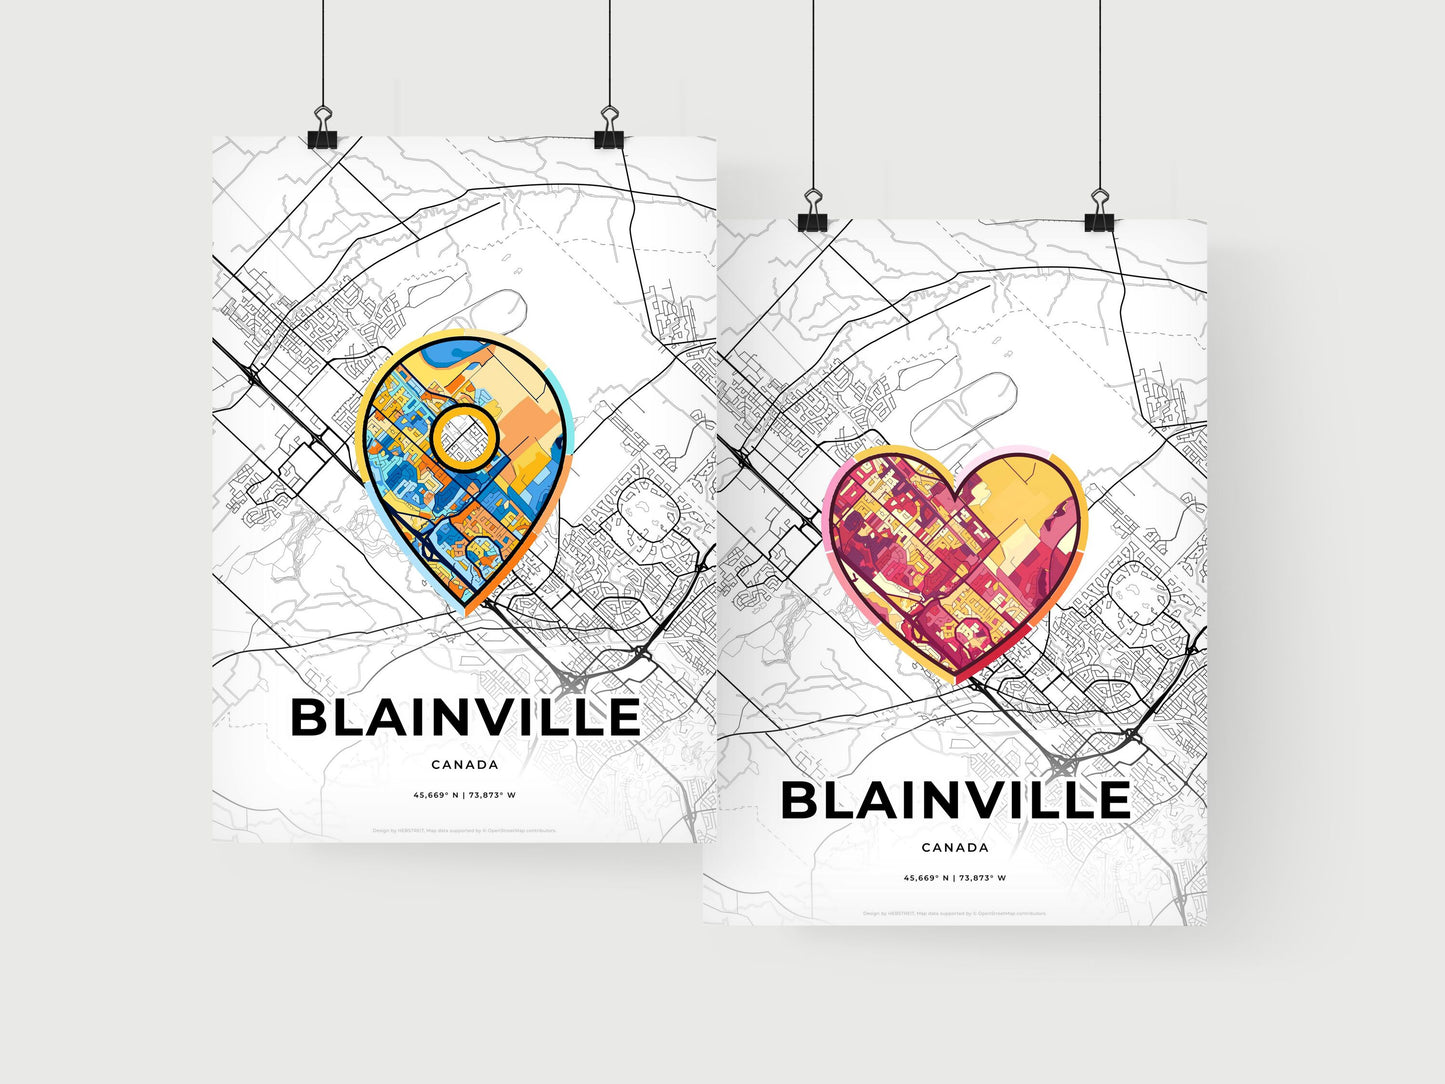 BLAINVILLE CANADA minimal art map with a colorful icon. Where it all began, Couple map gift.